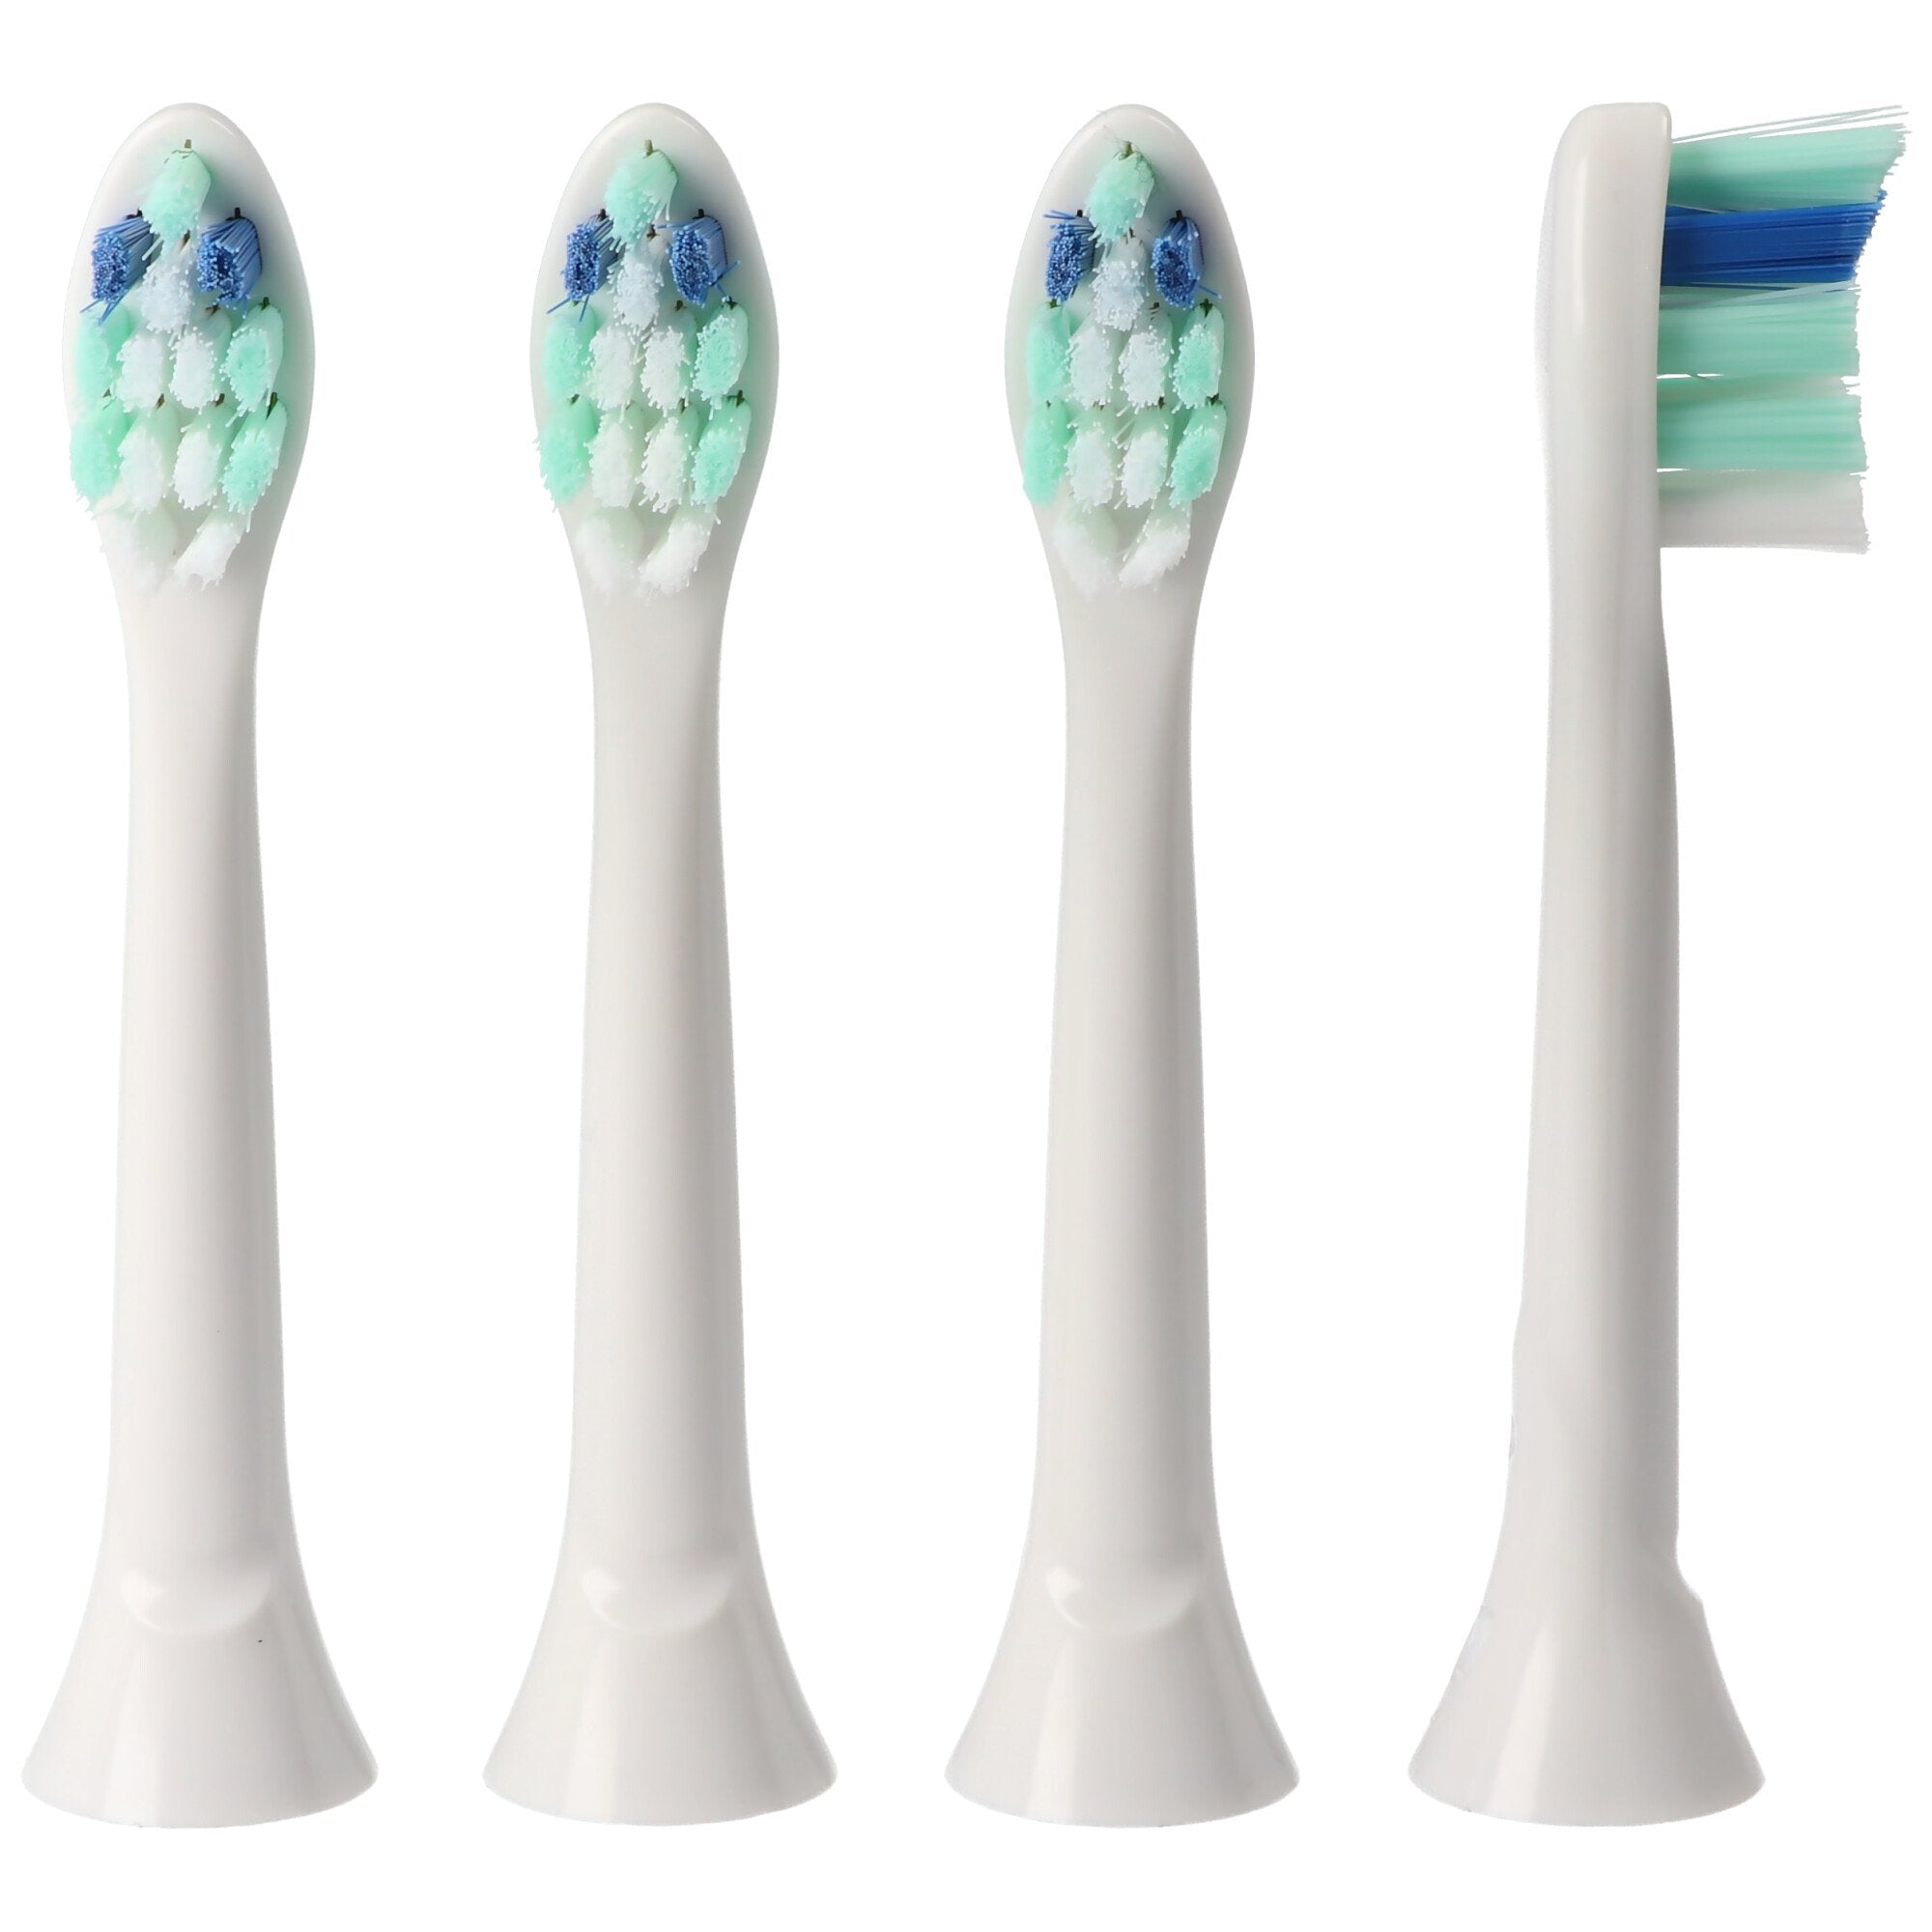 Pack of 4 Gum Care Cleaning Brush replacement toothbrush heads for electric toothbrushes from Philip